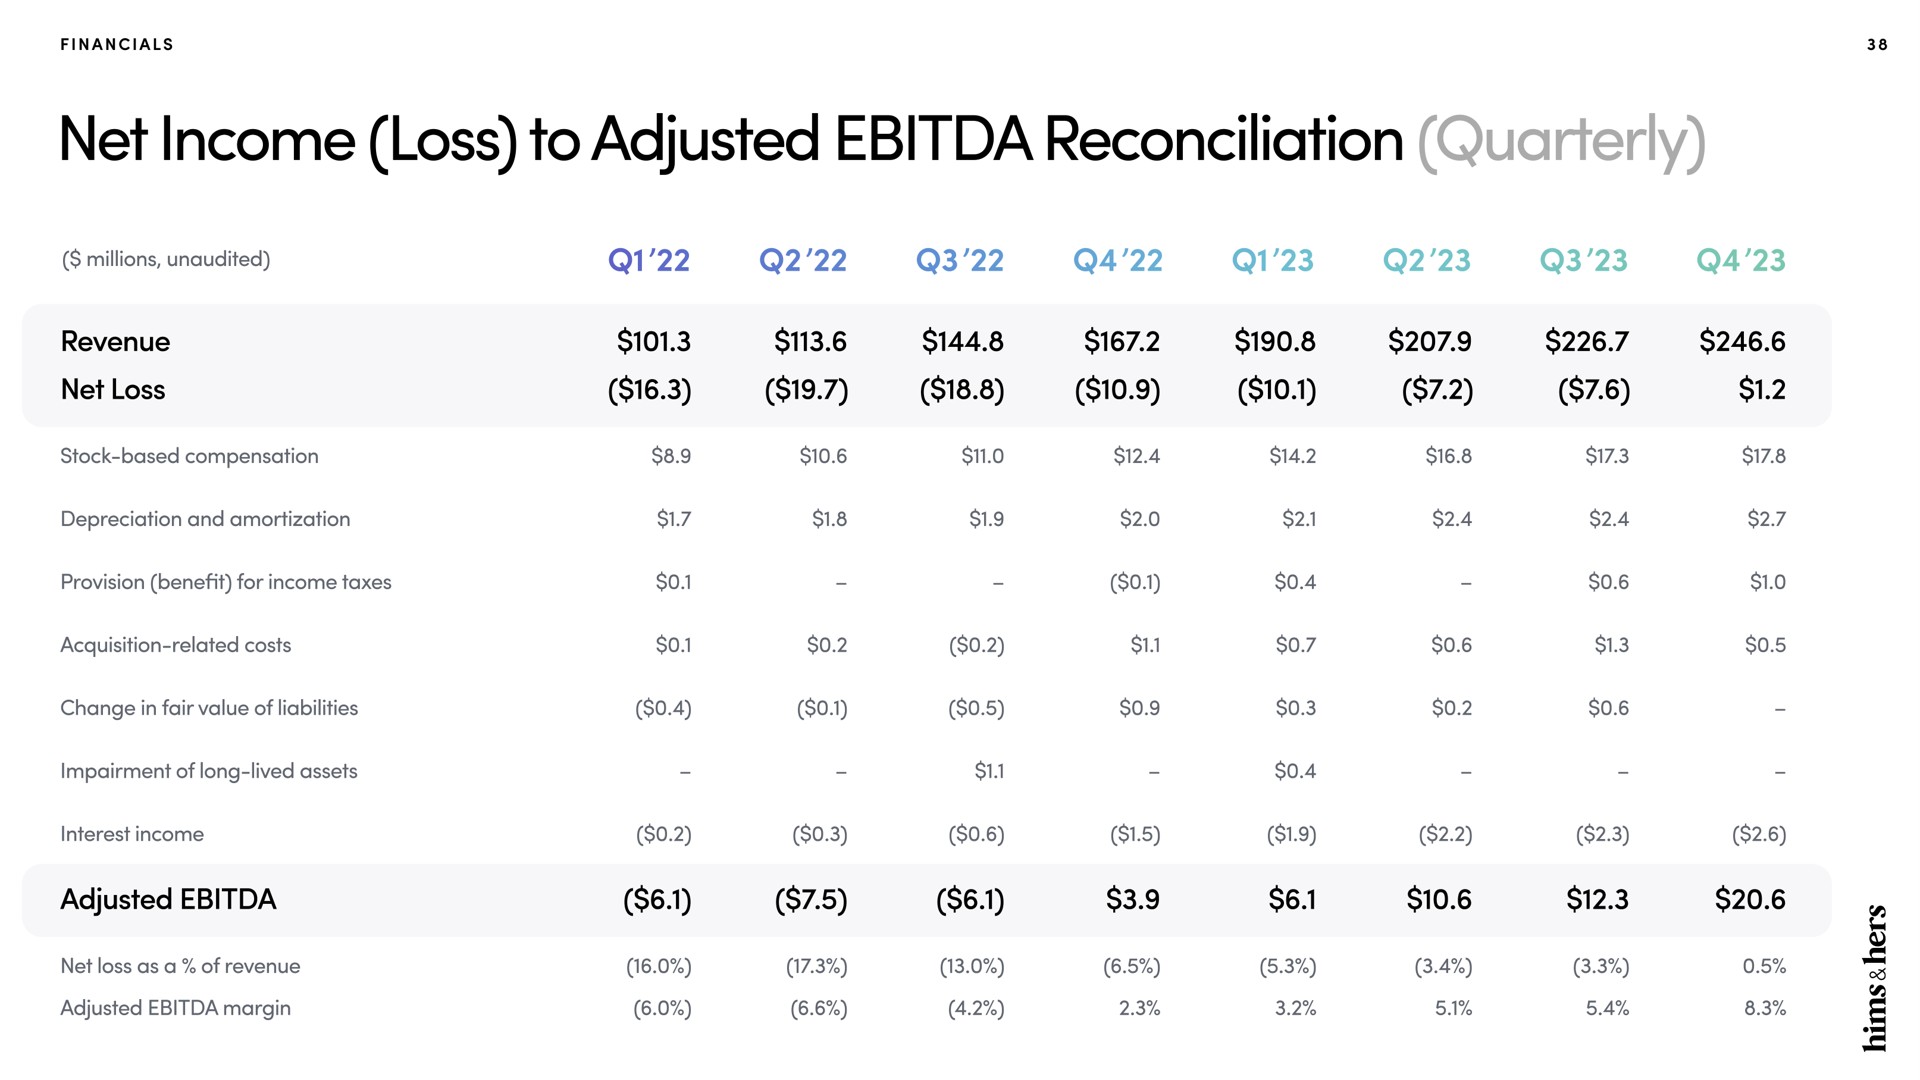 net income loss to adjusted reconciliation quarterly | Hims & Hers